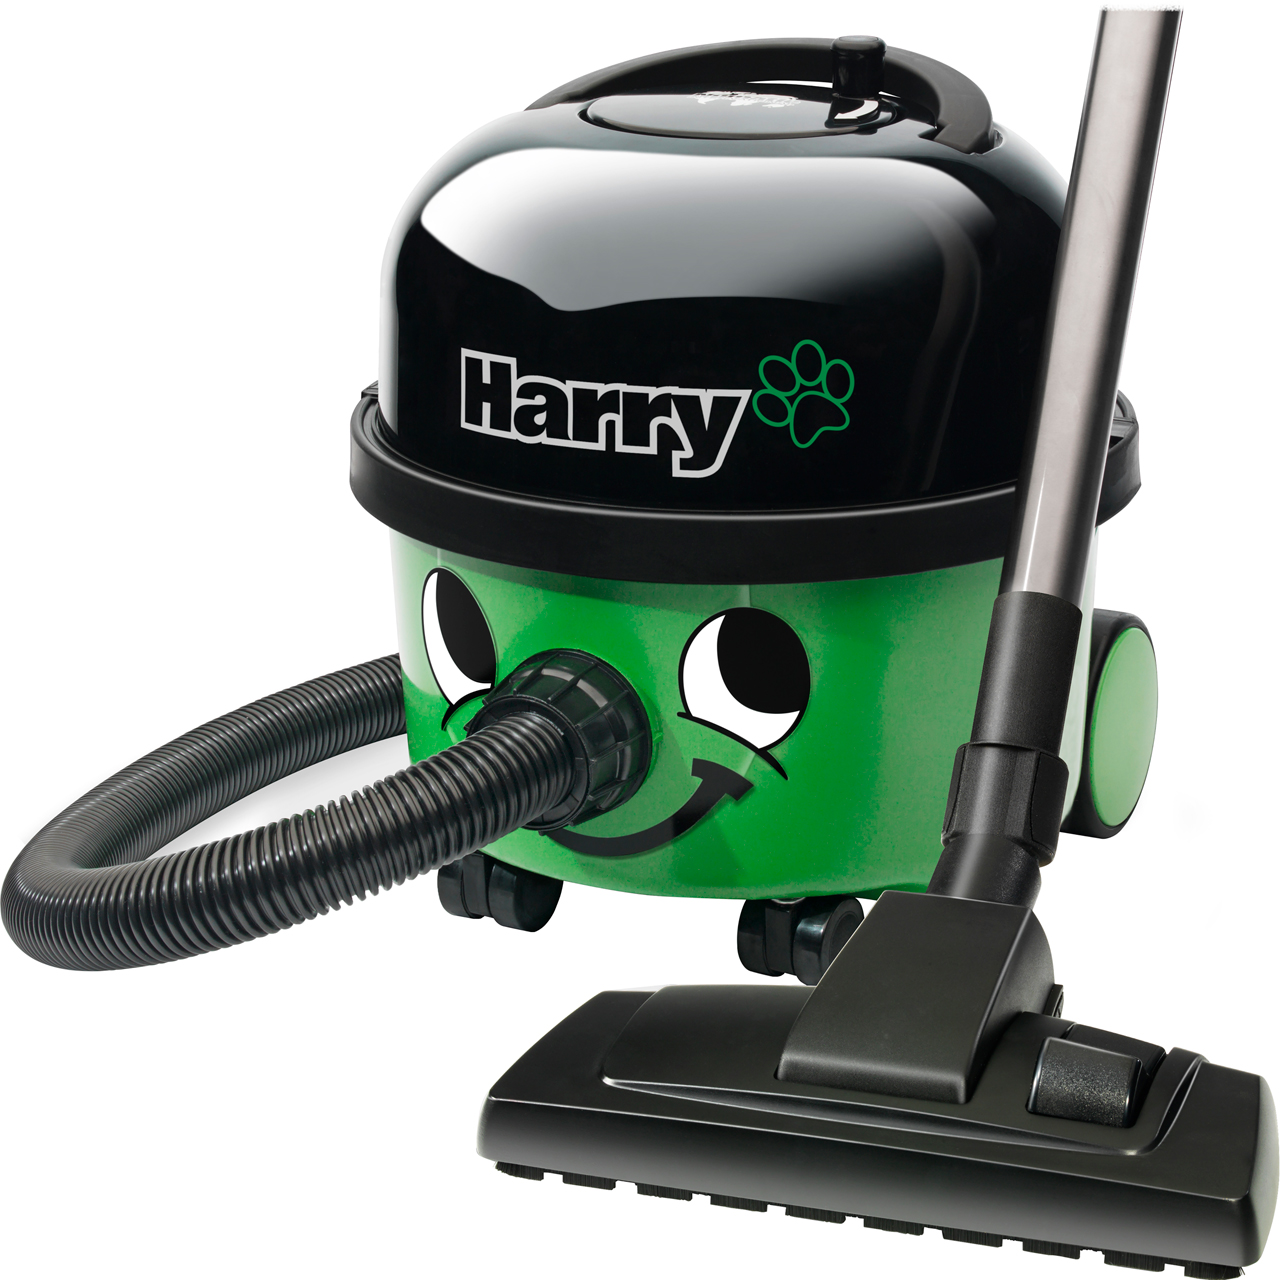 Harry HHR200-11 Cylinder Vacuum Cleaner with Pet Hair Removal Review